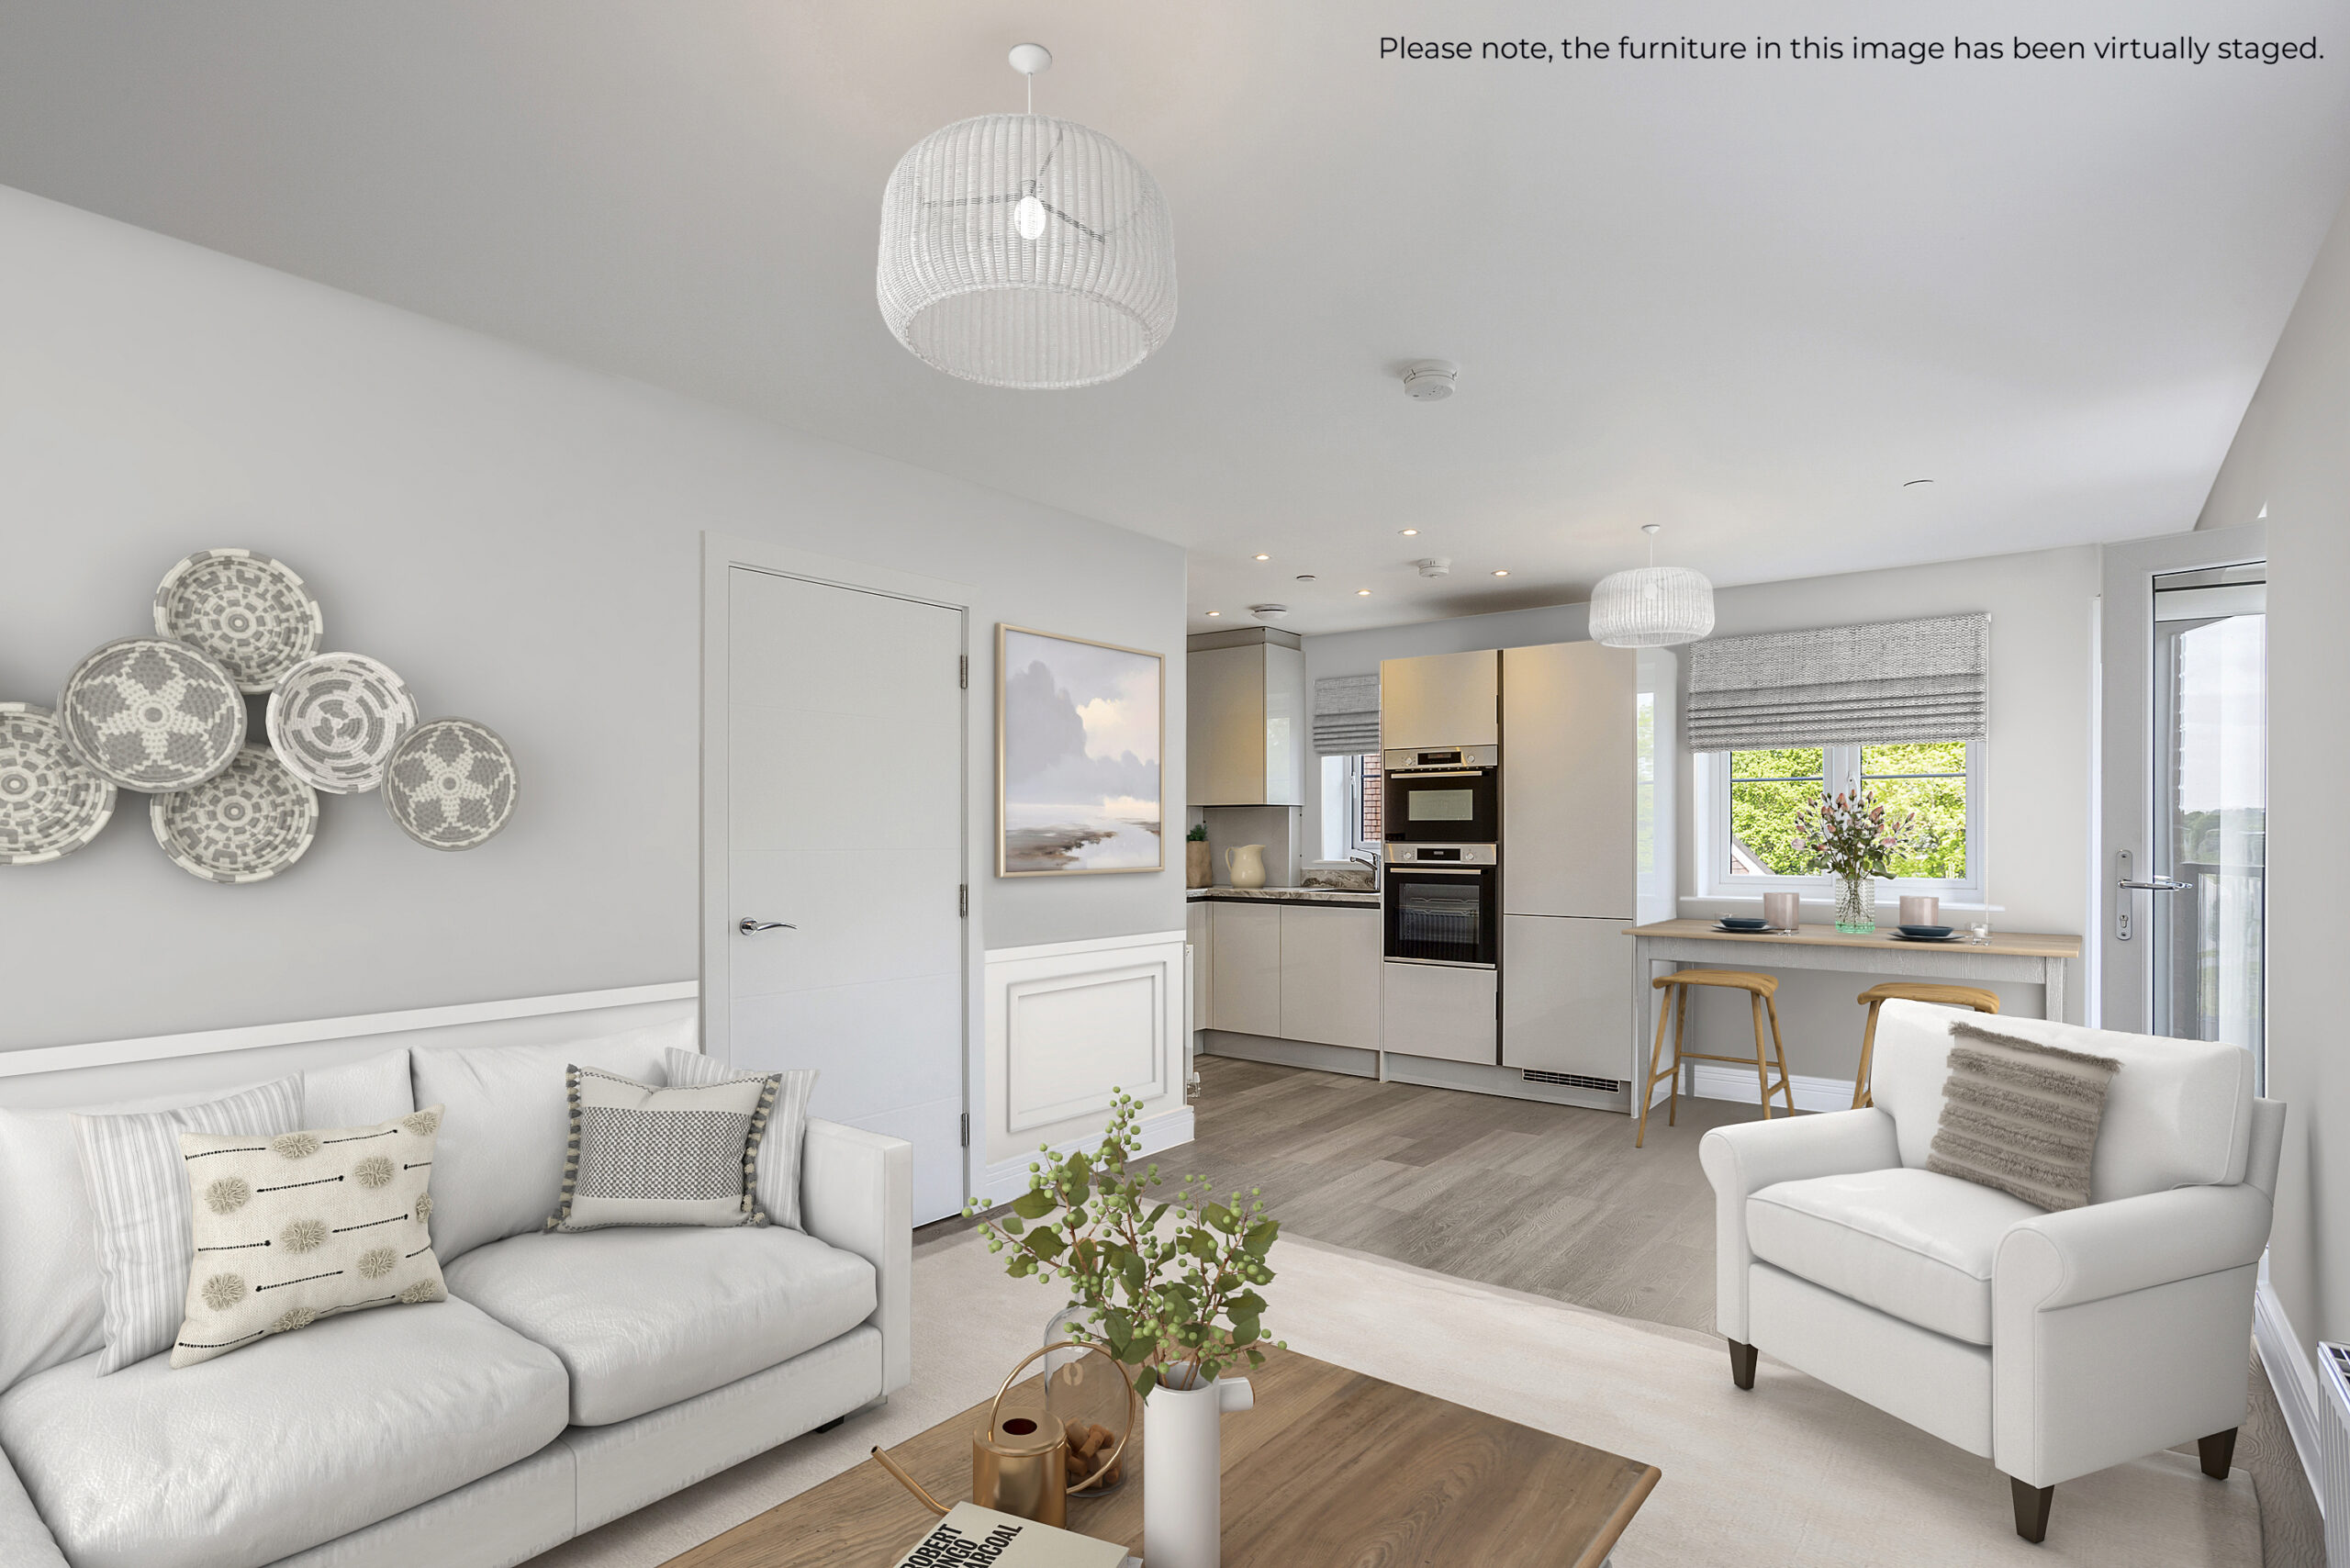 A CGI image of Abri Homes' Finchwood Park - available to purchase through Shared Ownership on Share to Buy!